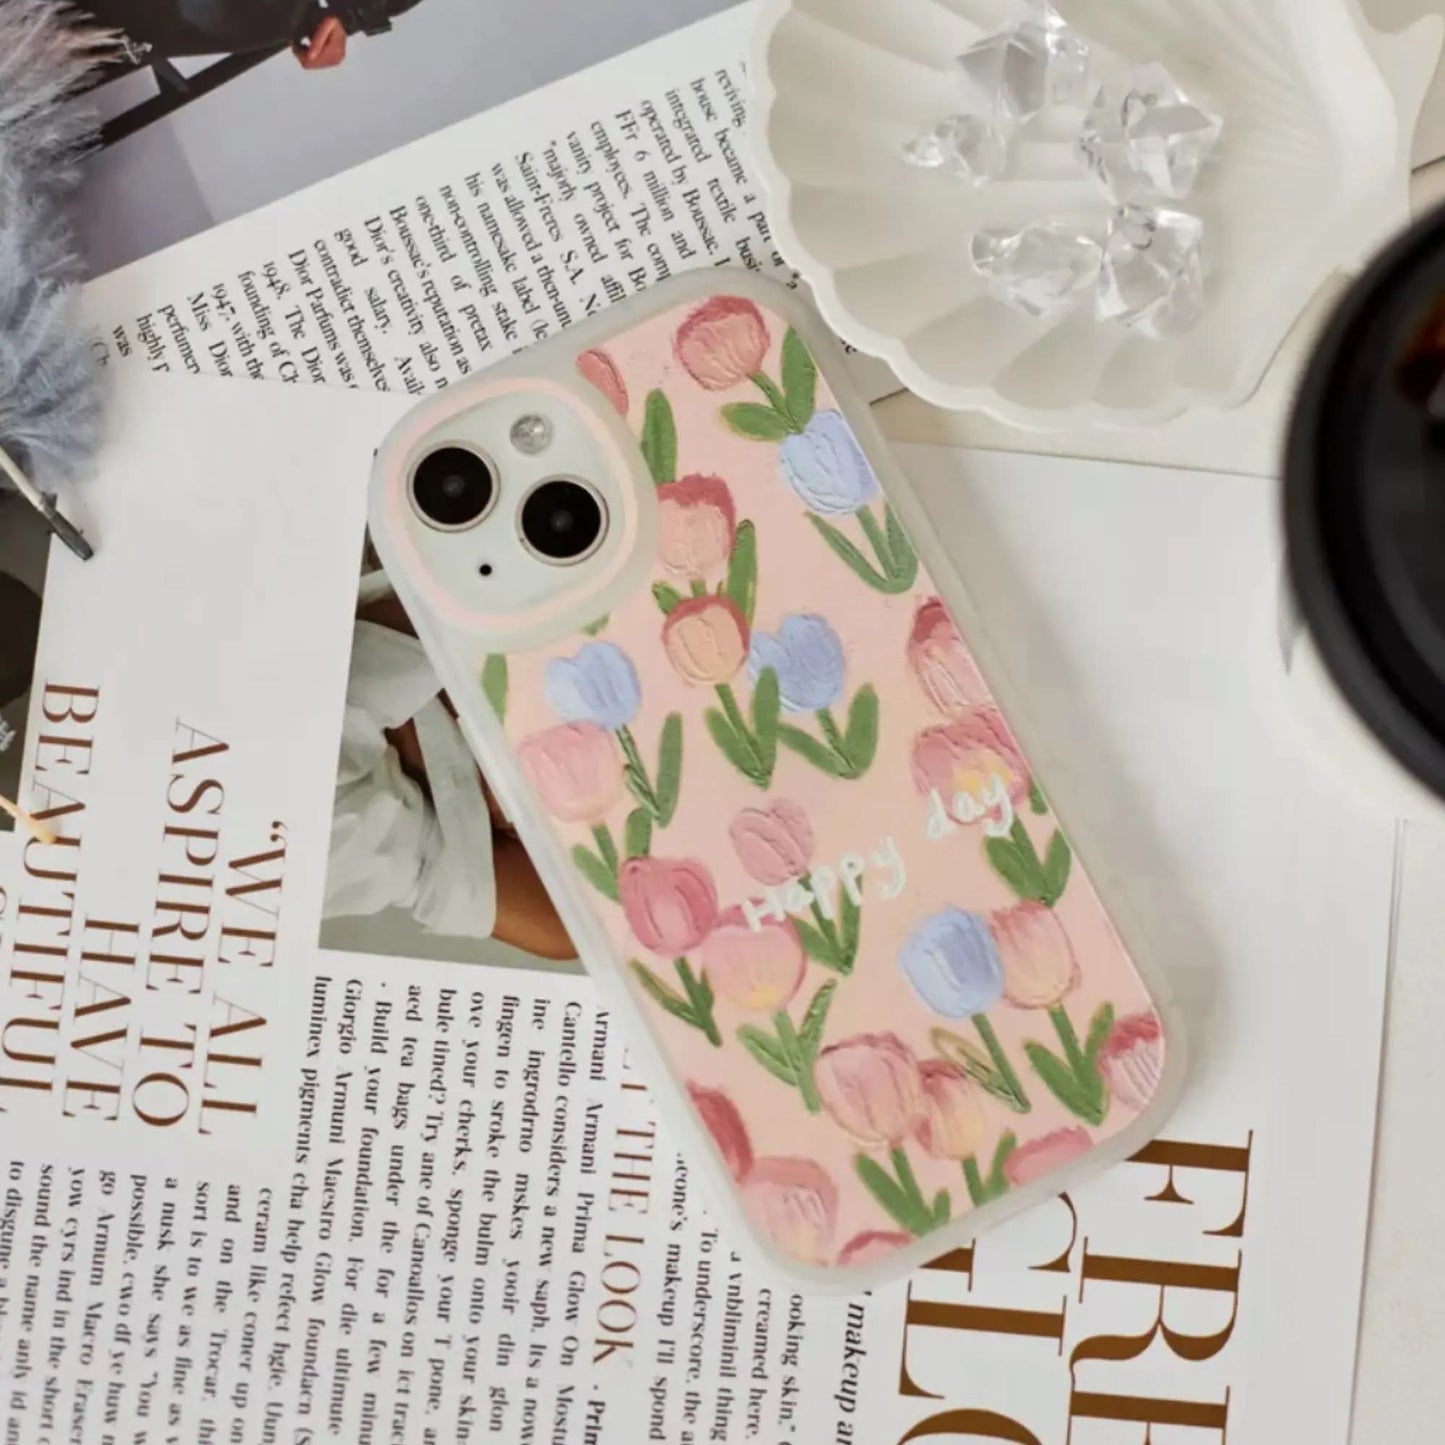 Pink Flowers Case My Store